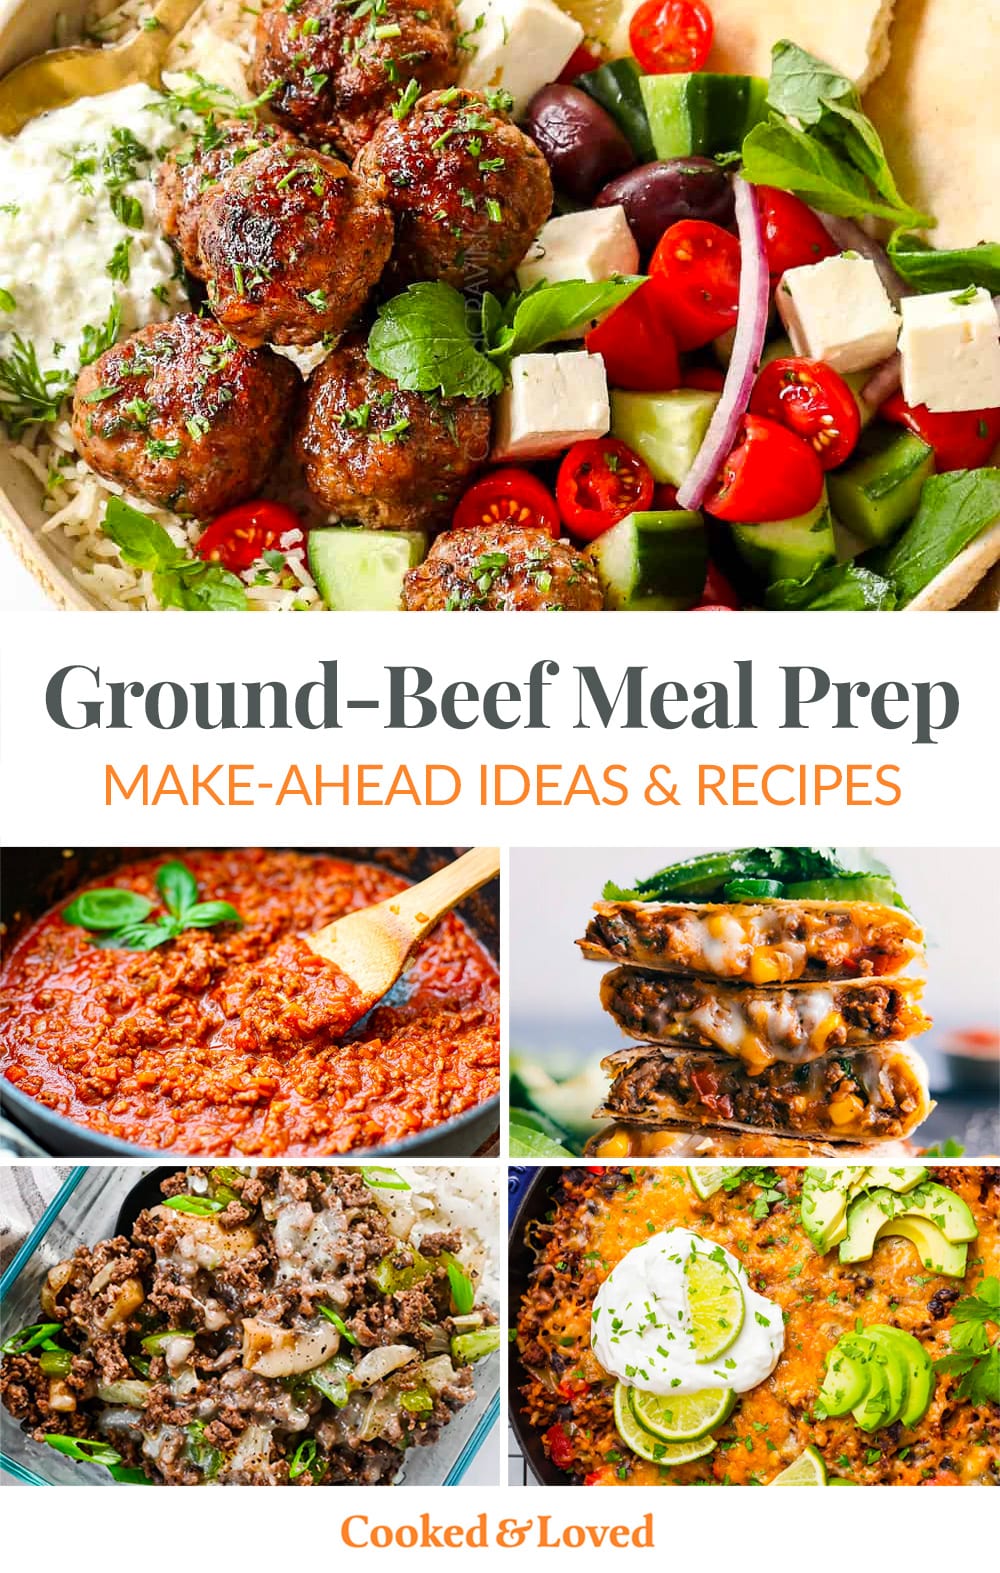 Salad Meal Prep Ideas for Quick Meals All Week - Crowded Kitchen